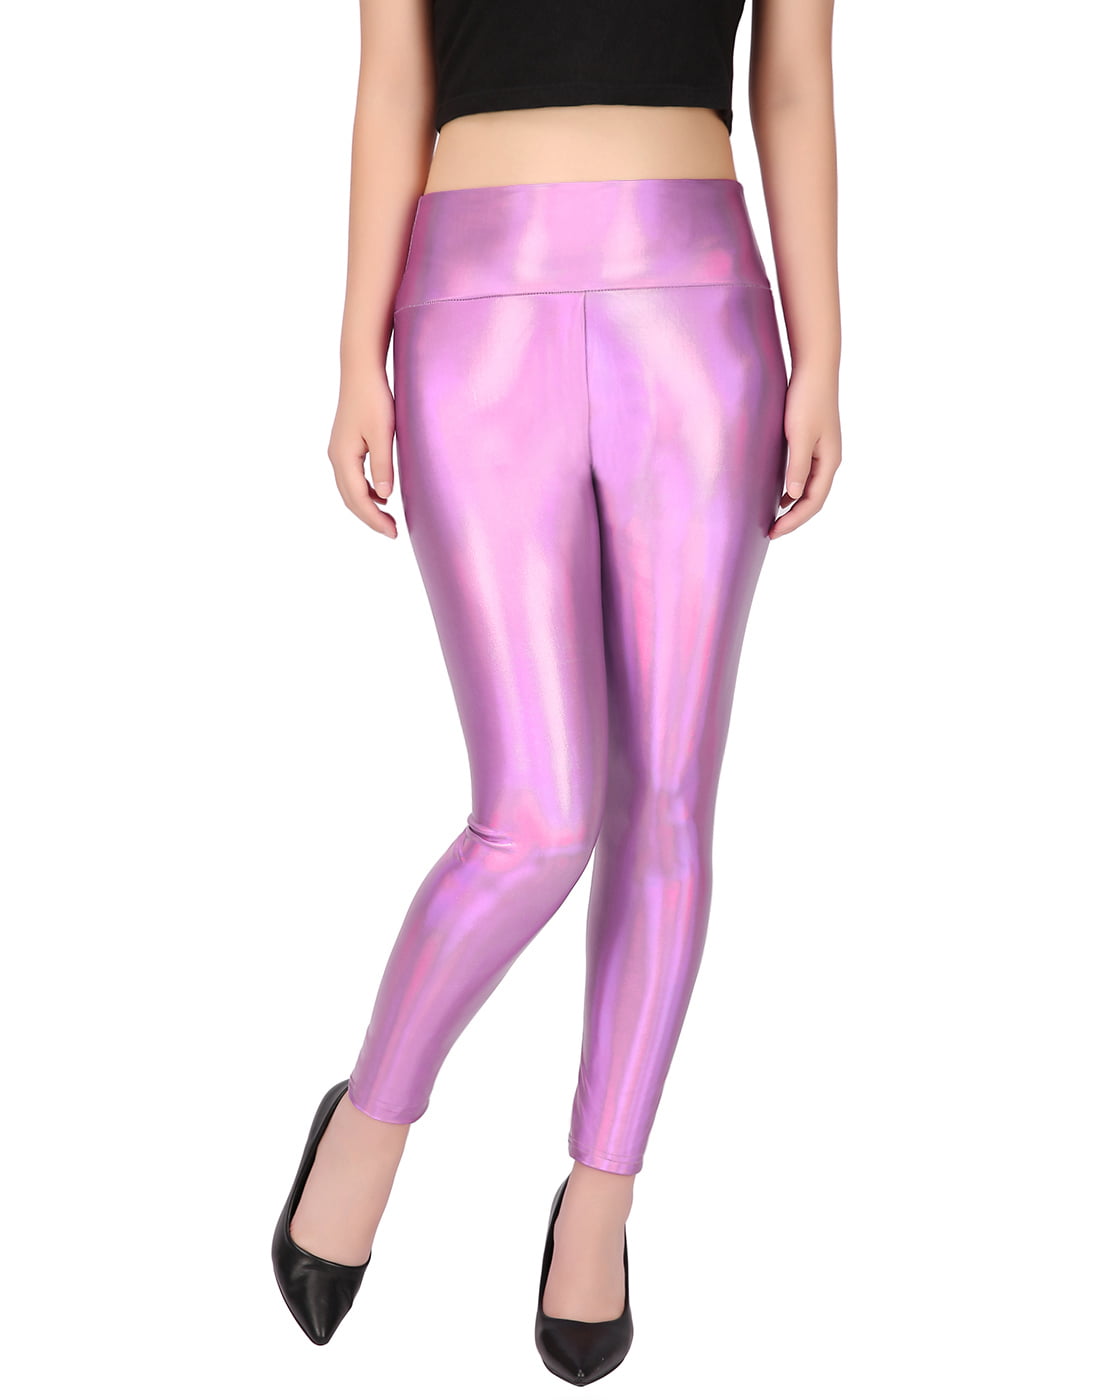 Hot Barbiecore pink stretchy shiny leggings pants Y2K 80's 2000 Party O/S  Barbie | eBay